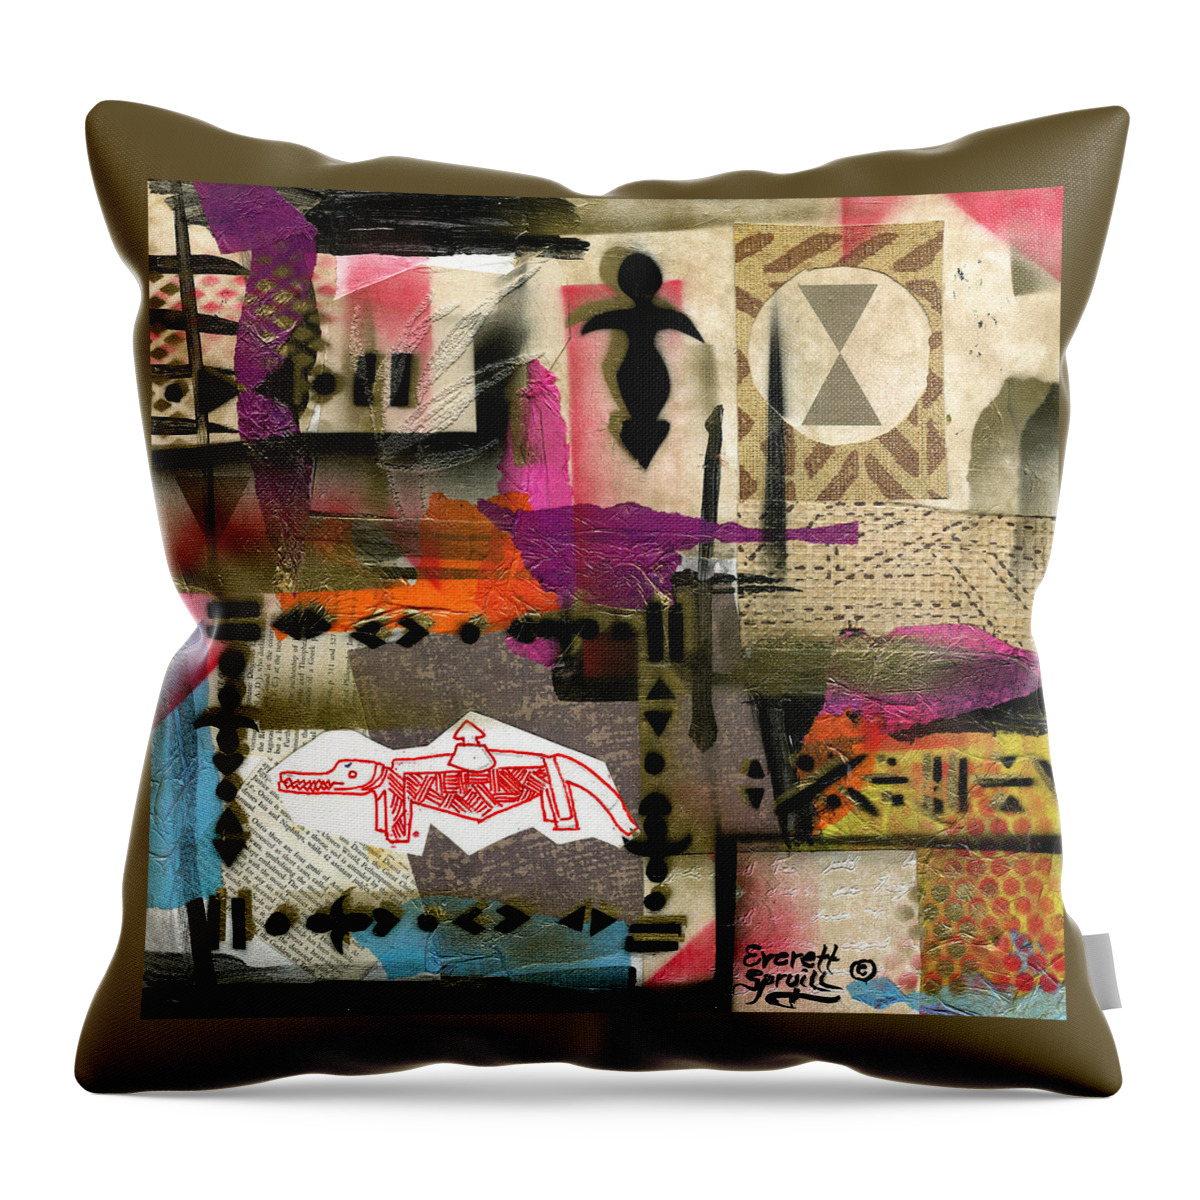 Everett Spruill Throw Pillow featuring the painting Reparations #603 by Everett Spruill